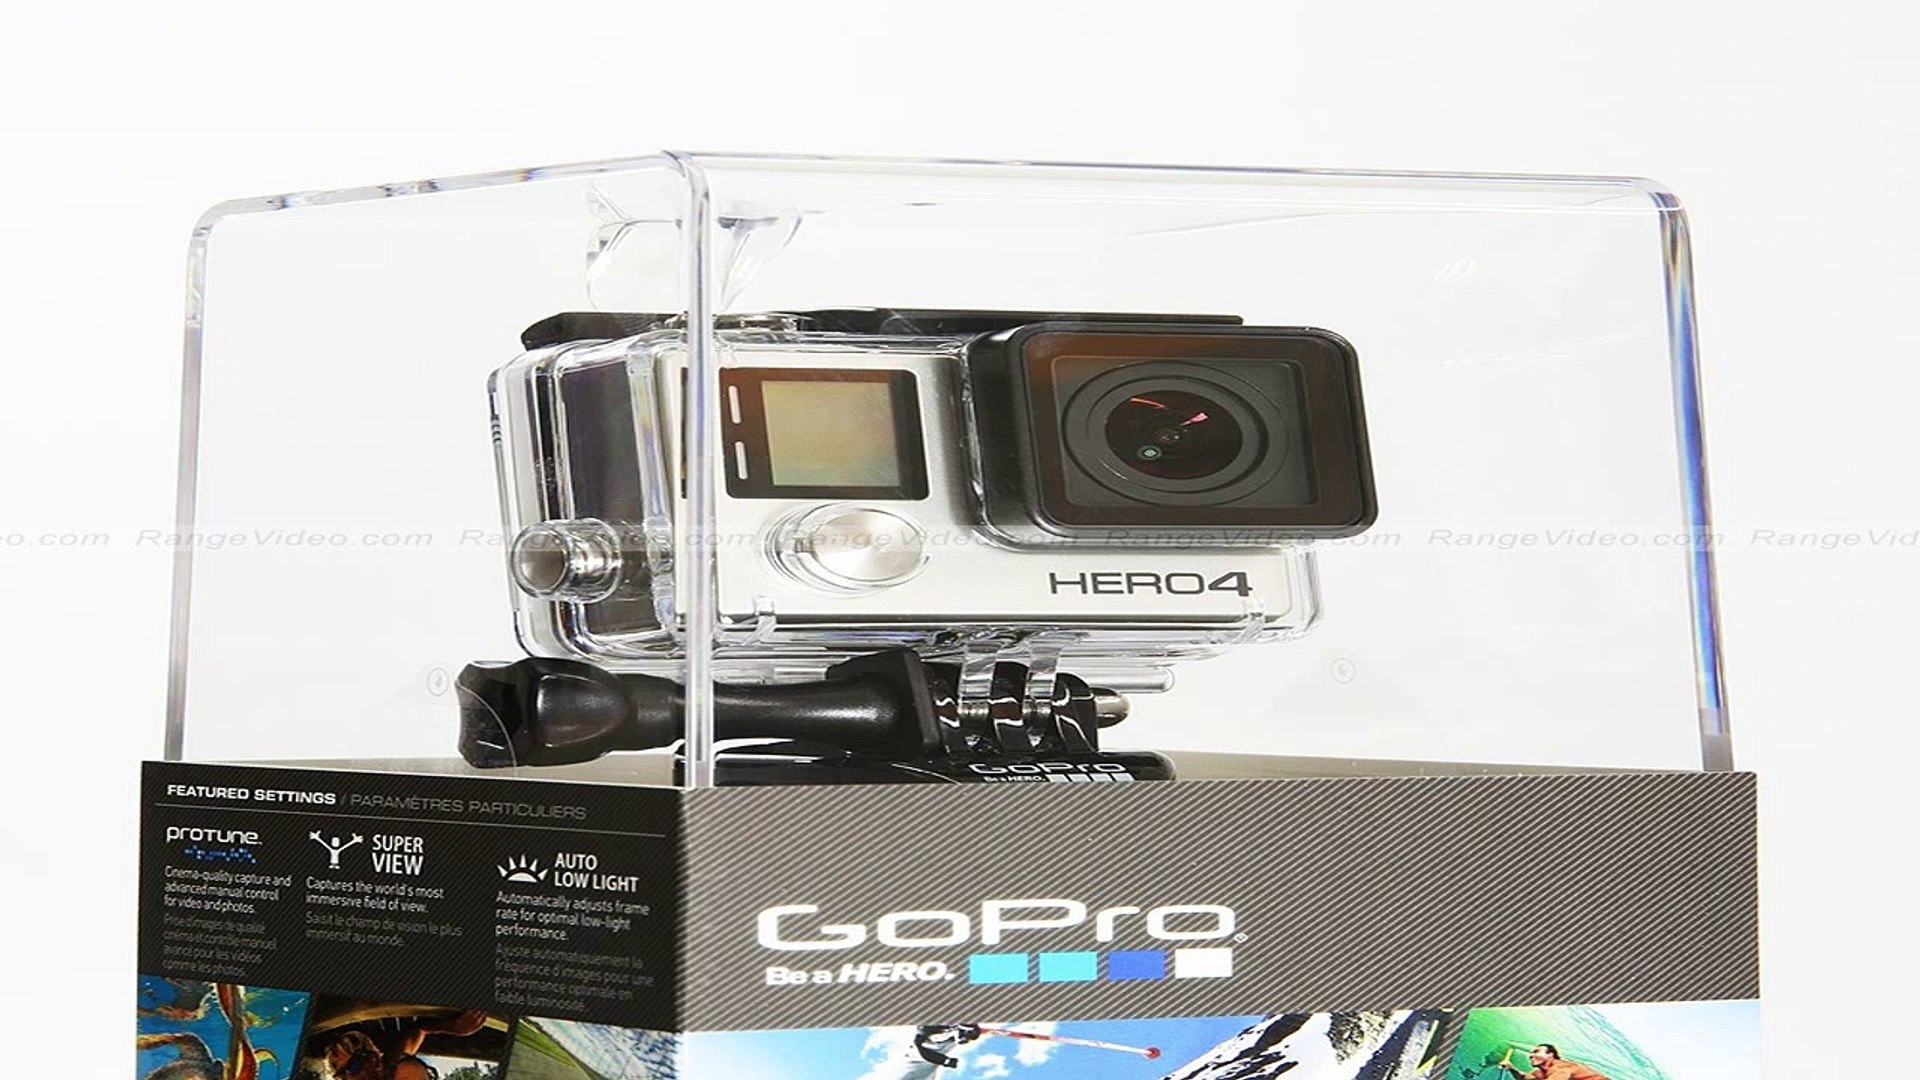 GoPro HERO 4 Black & Silver Tutorial: How To Get Started - video Dailymotion